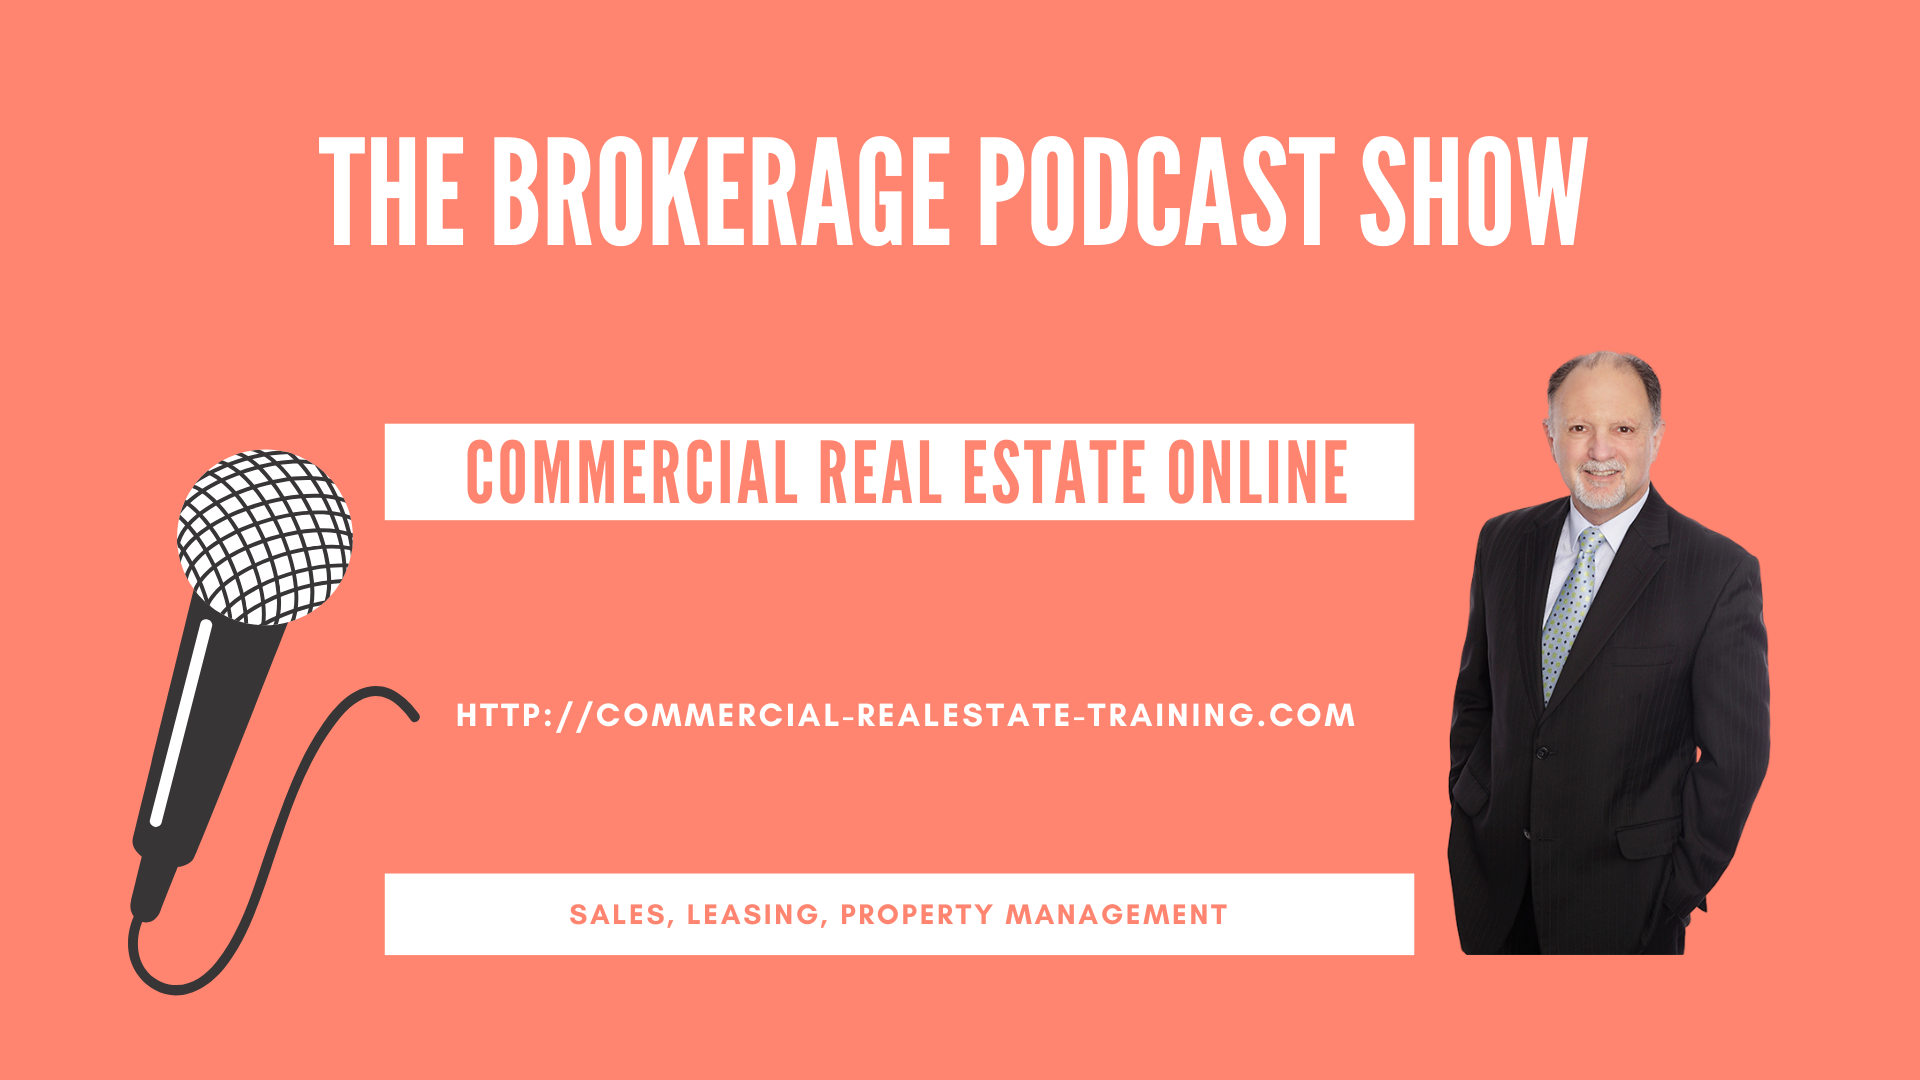 commercial real estate brokerage podcast by John Highman